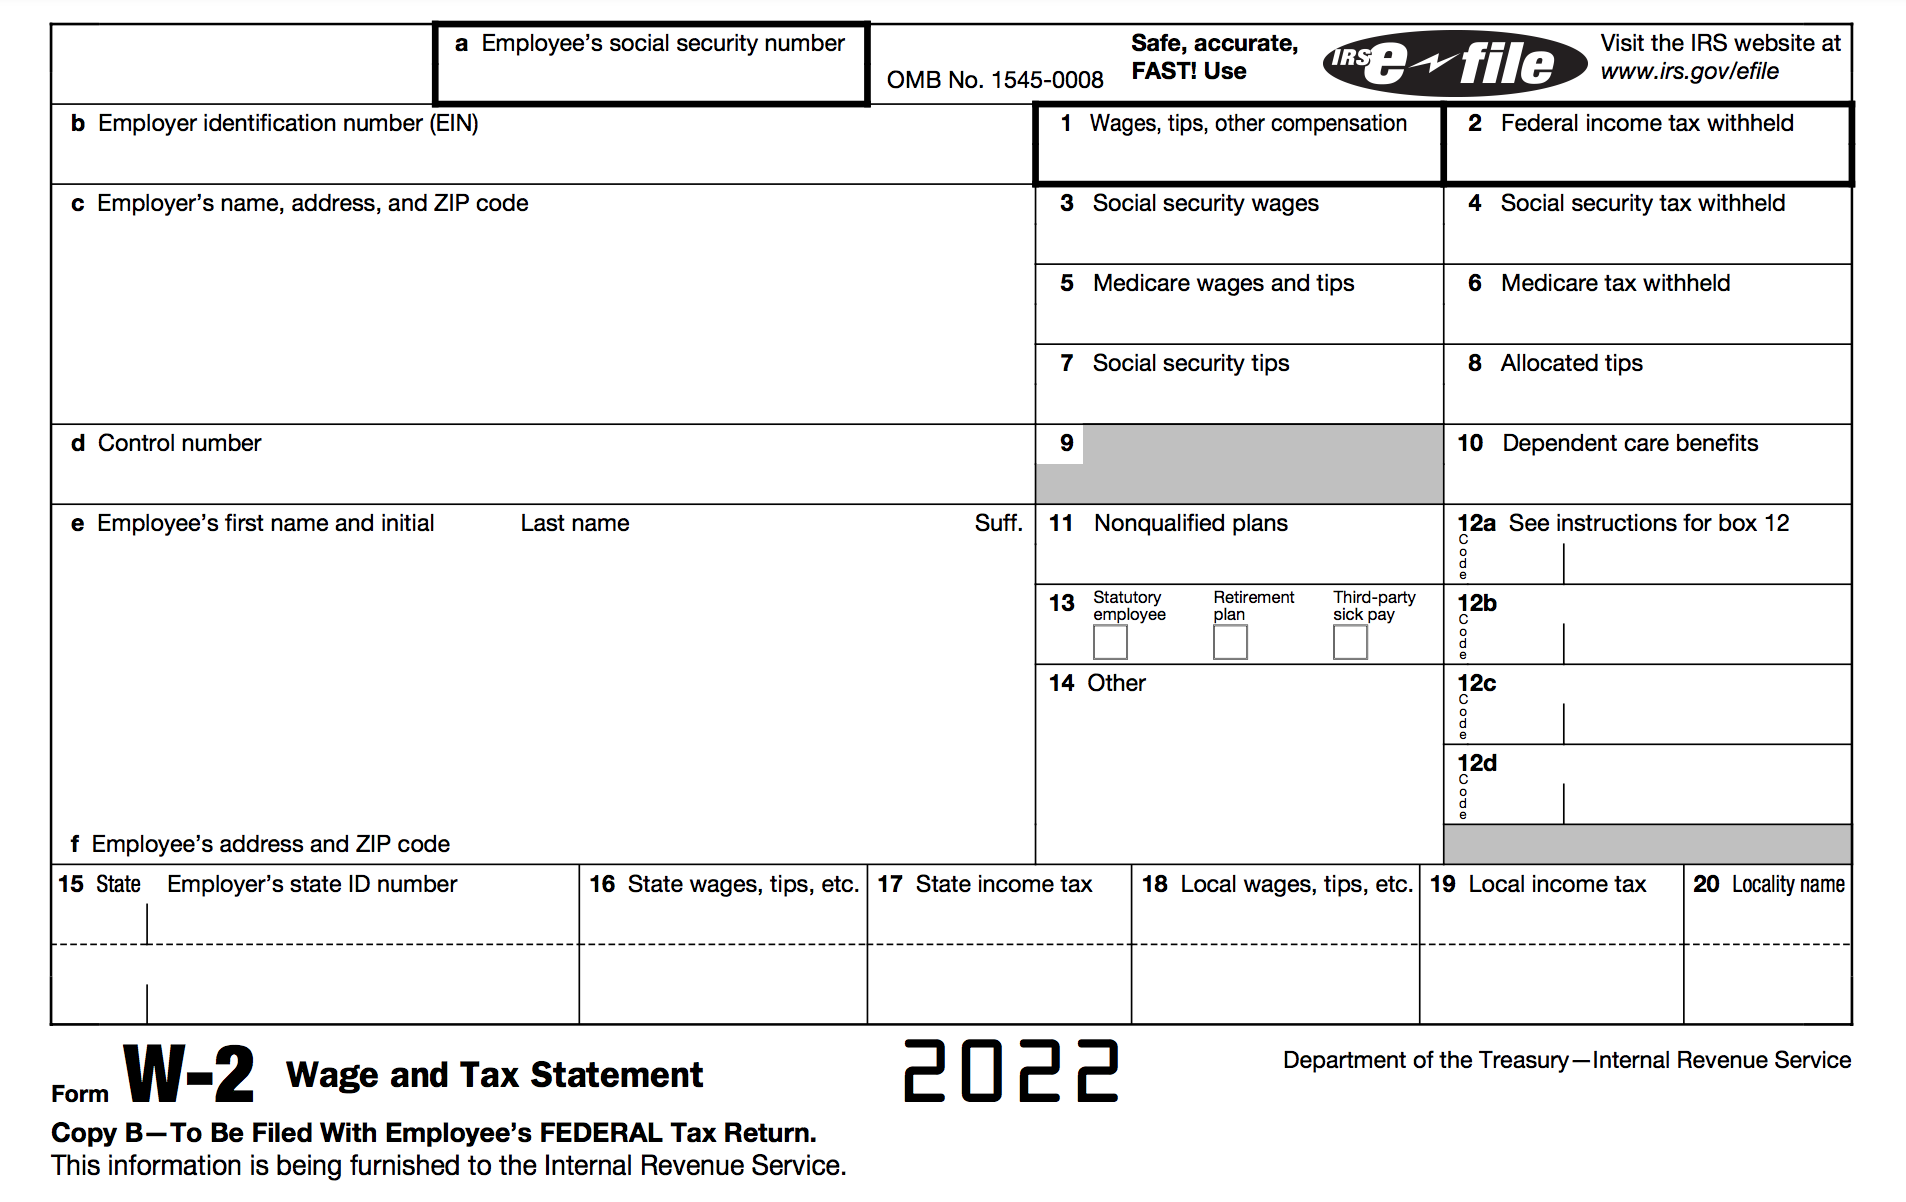 How To Fill Out A W-2 Tax Form | Smartasset for How Do You Fill Out Your W2 Form